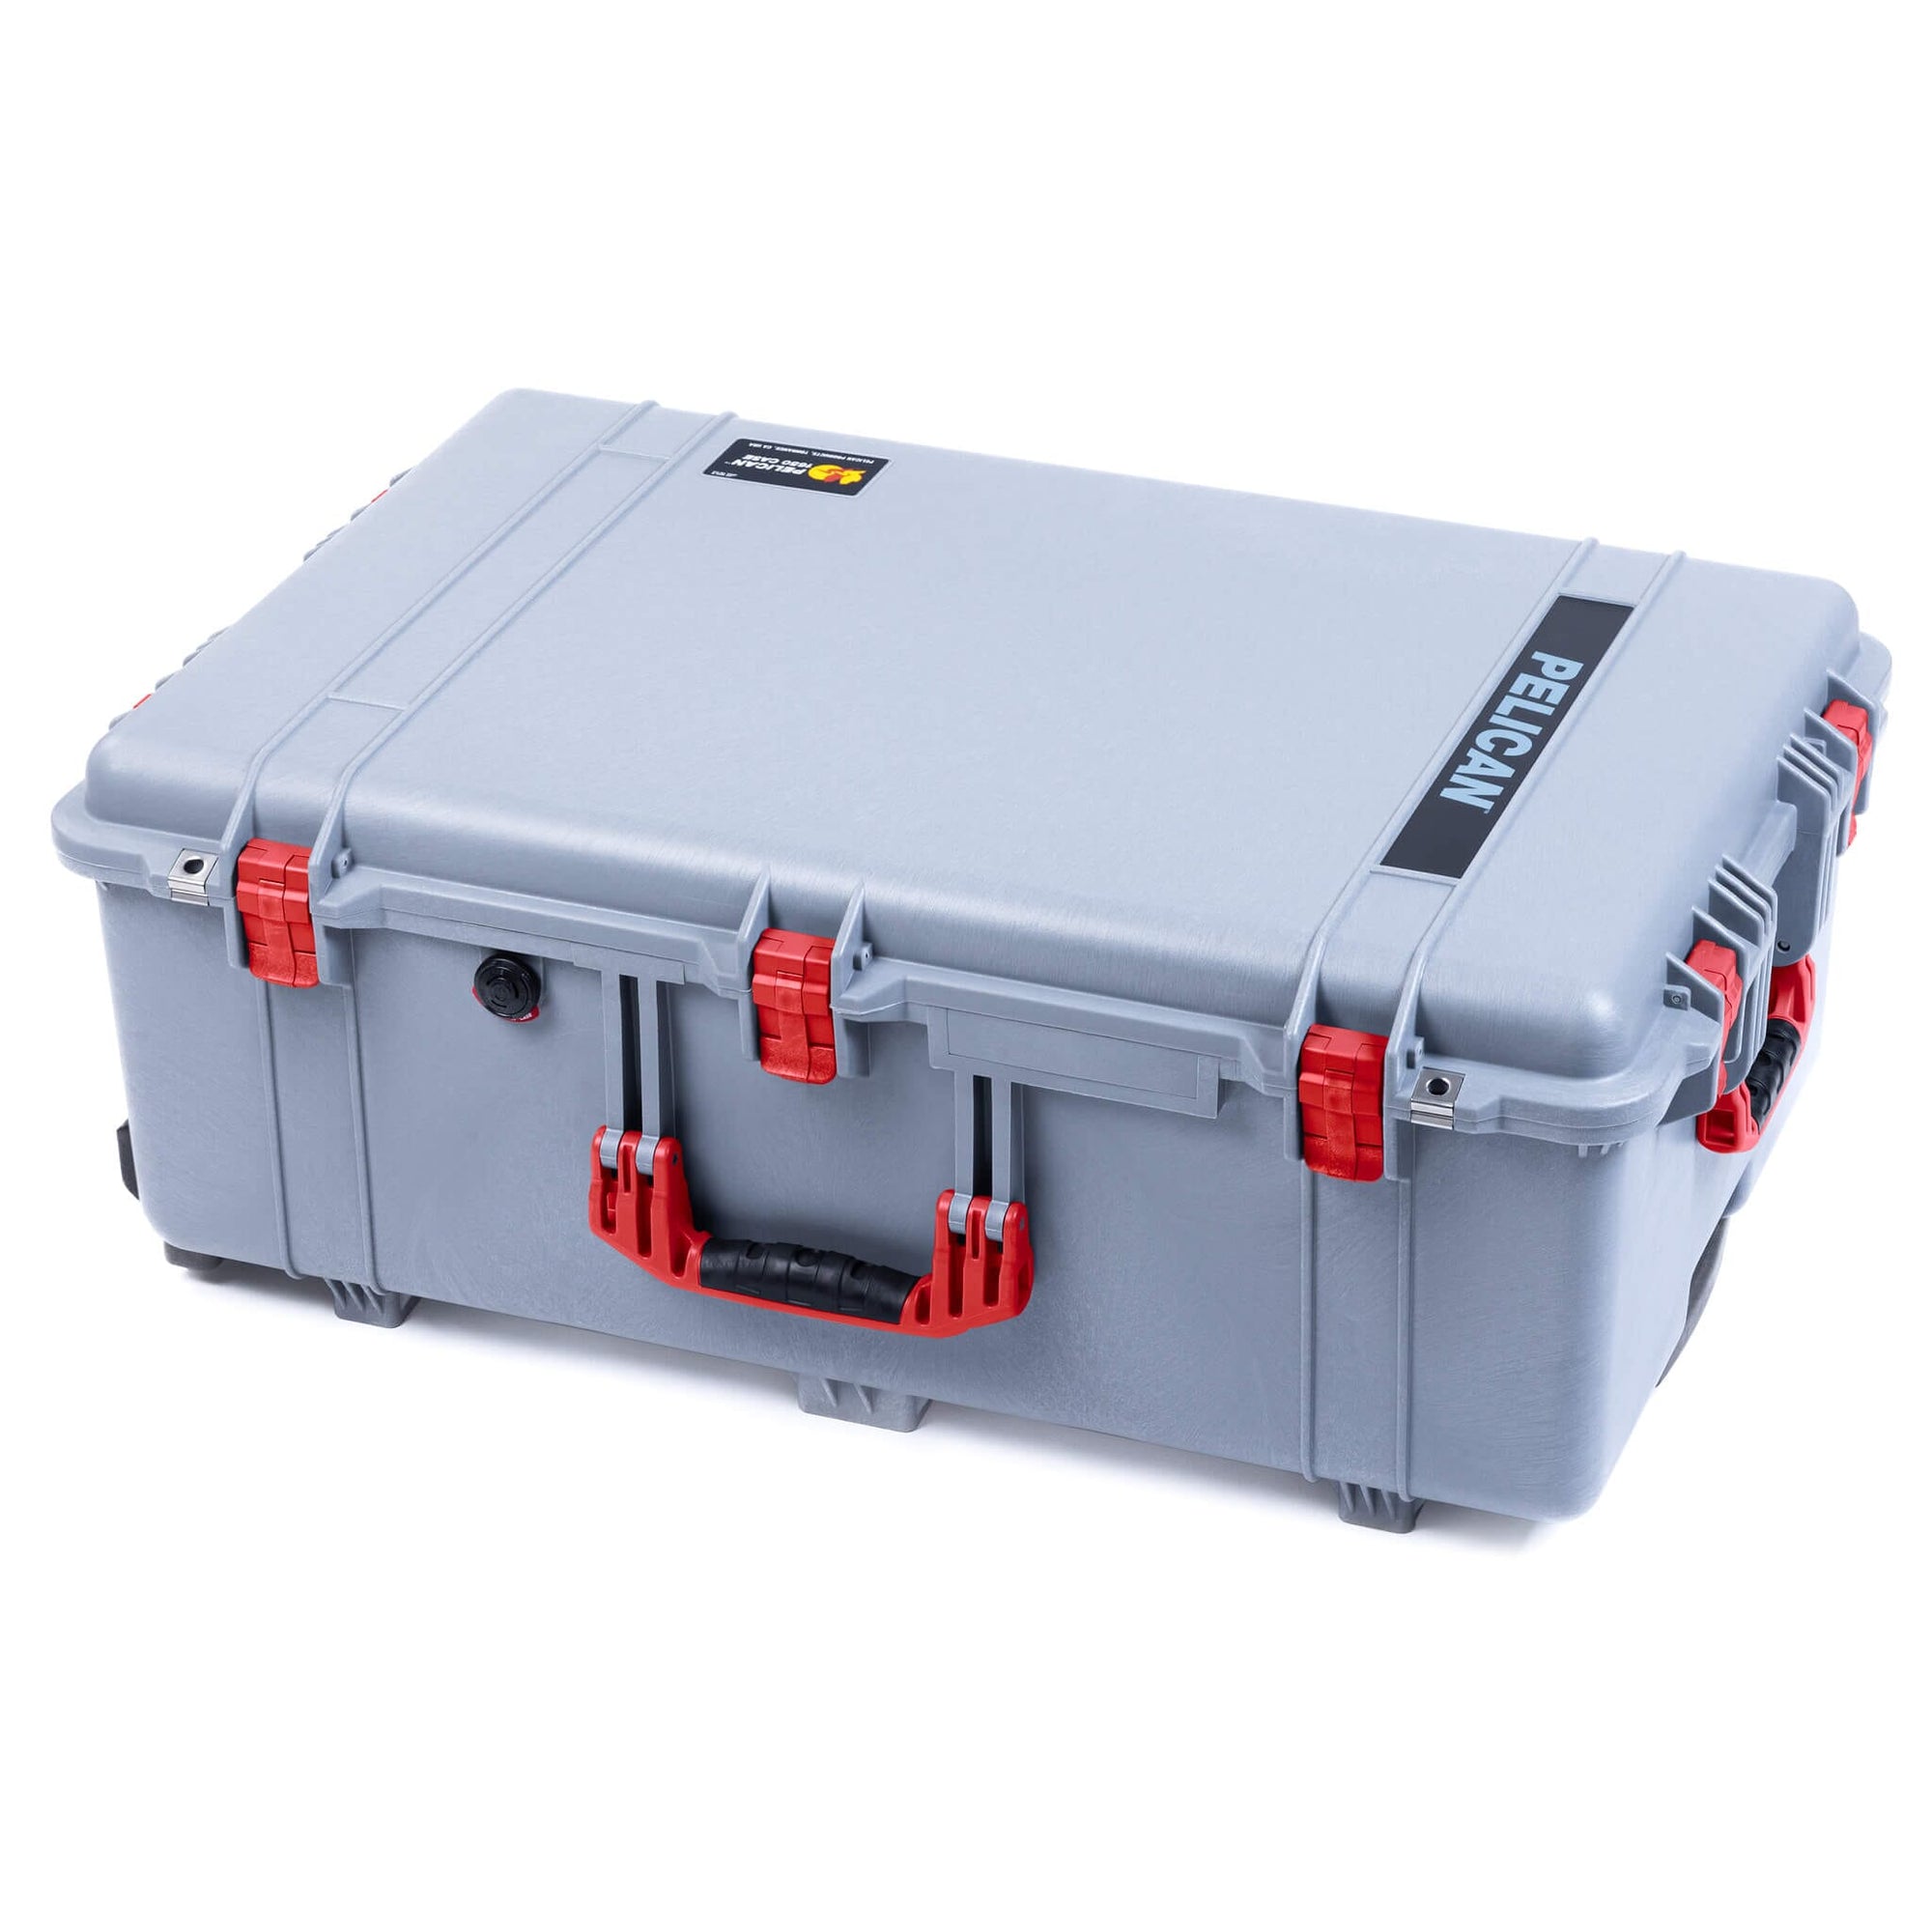 Pelican 1650 Case, Silver with Red Handles & Latches ColorCase 